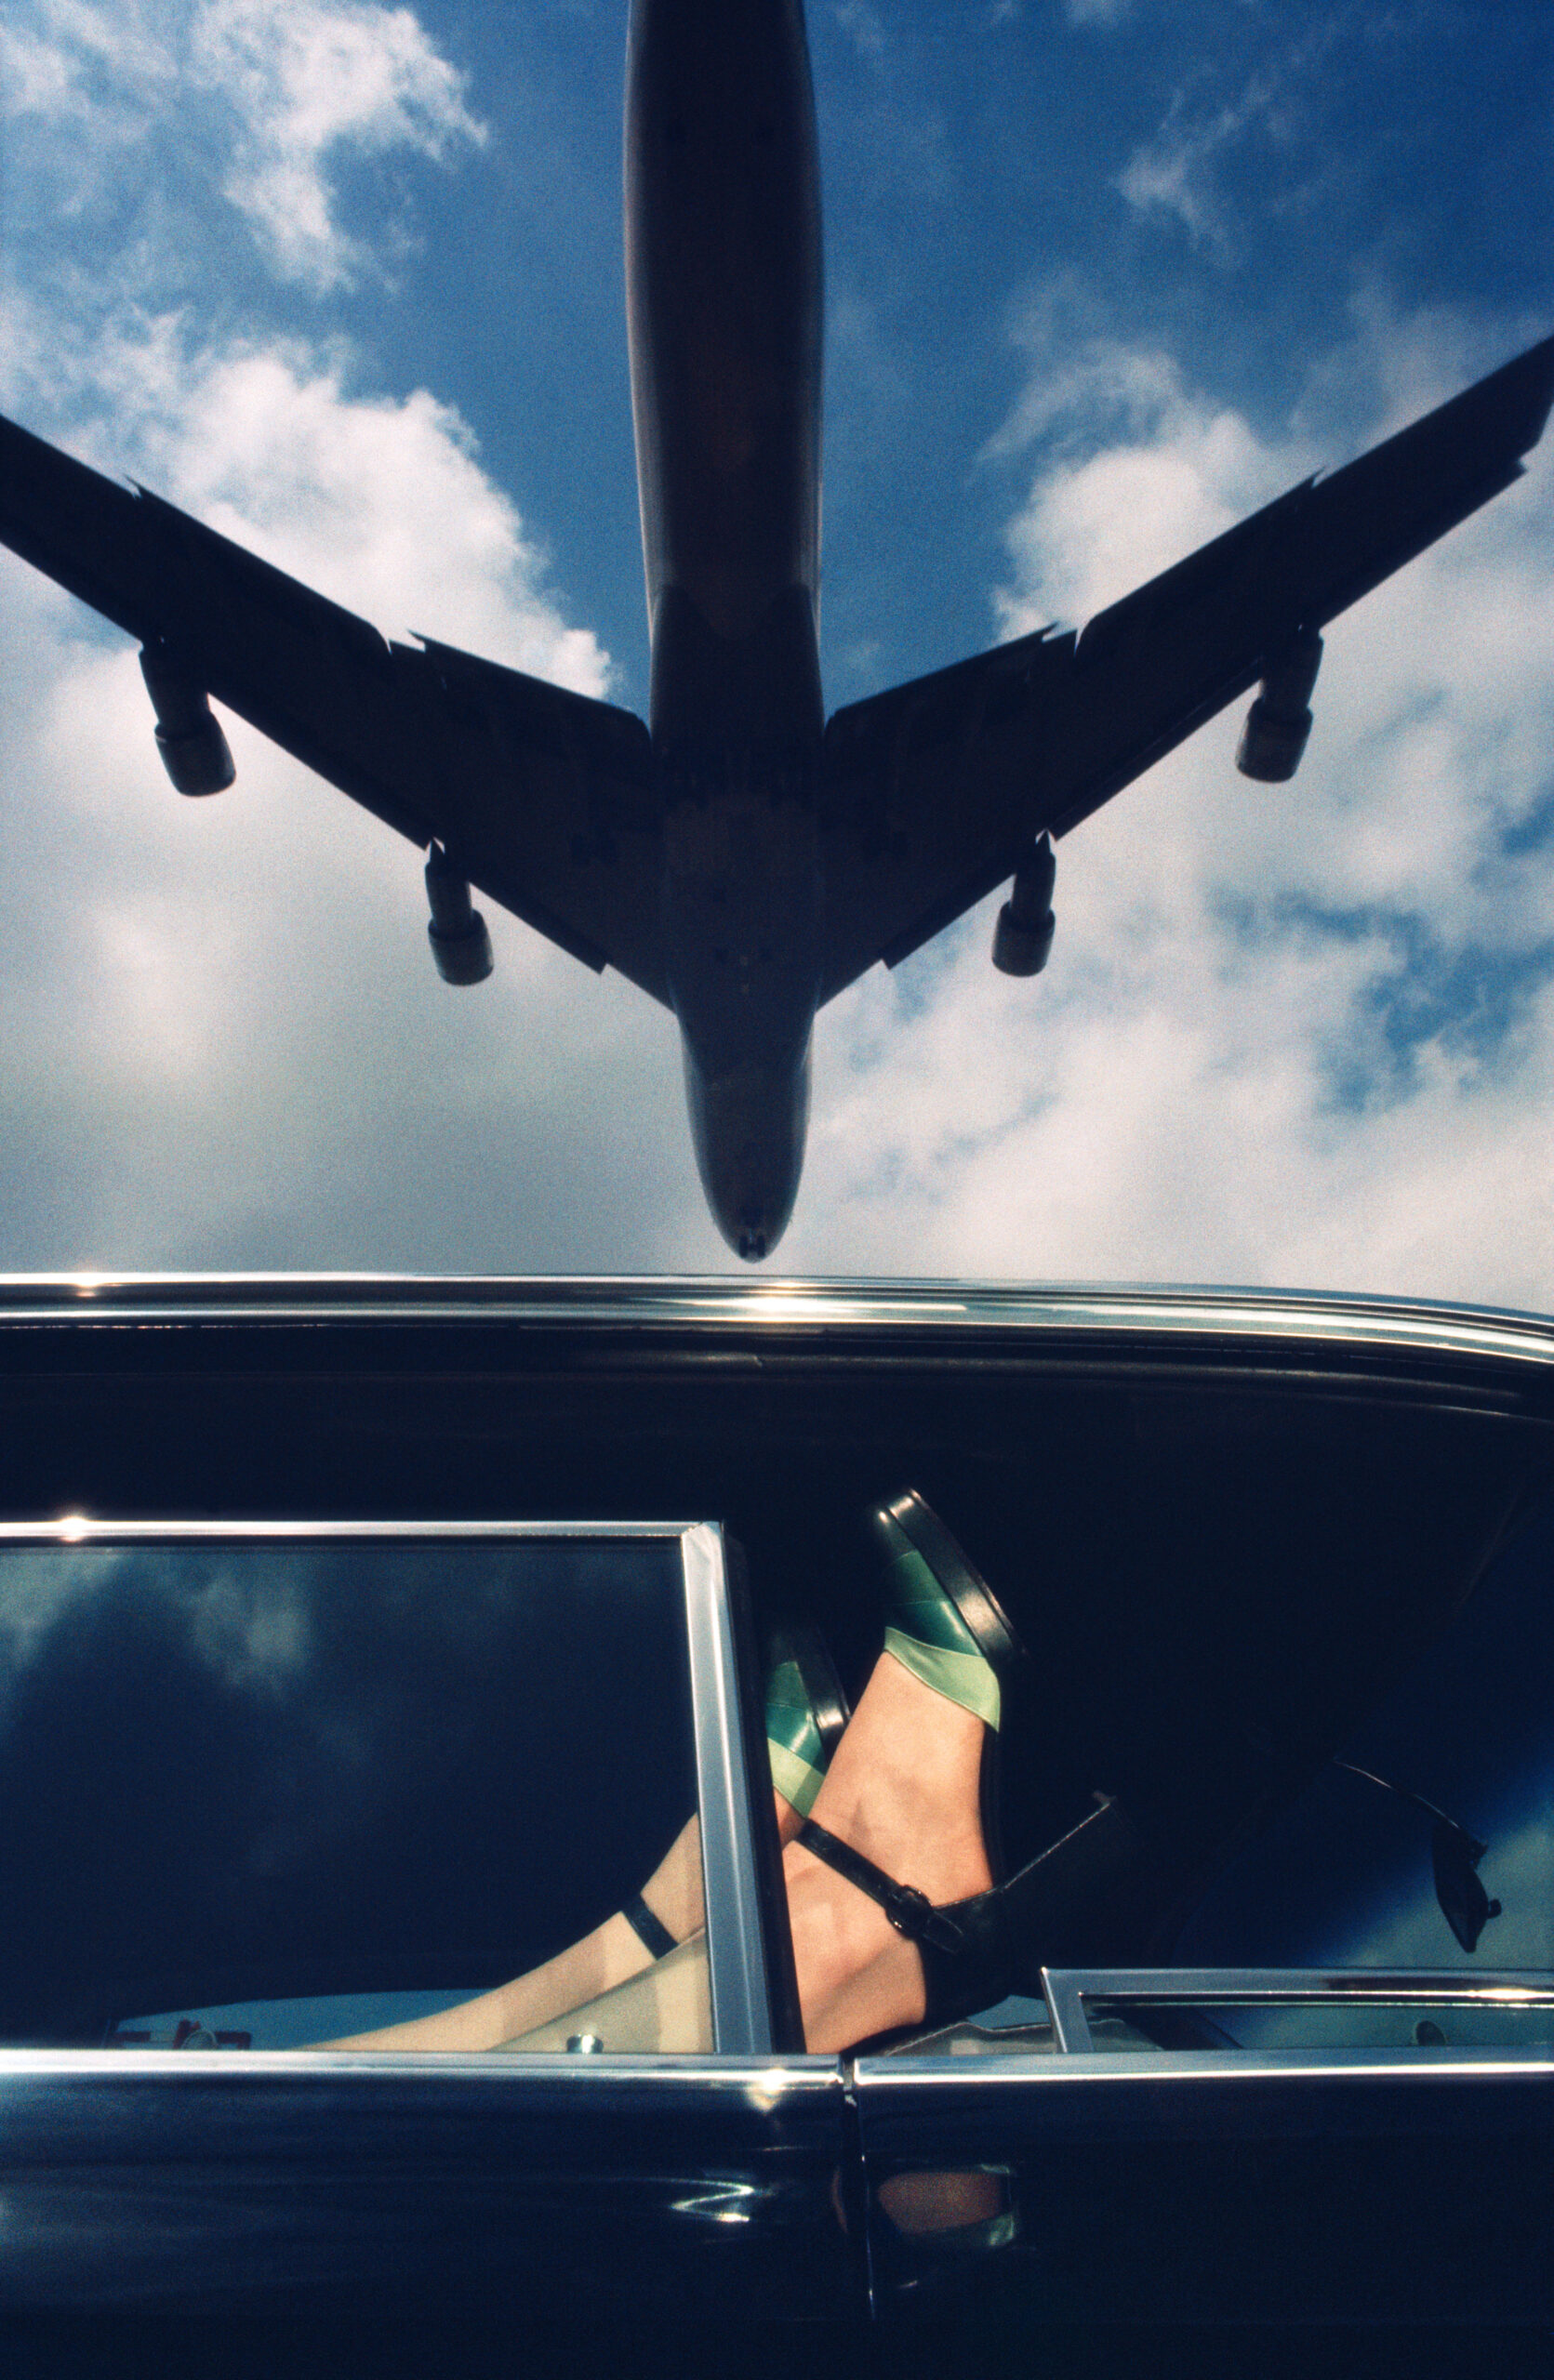 Outside of a car, we see a woman's feet up in the window while a plane flies overhead